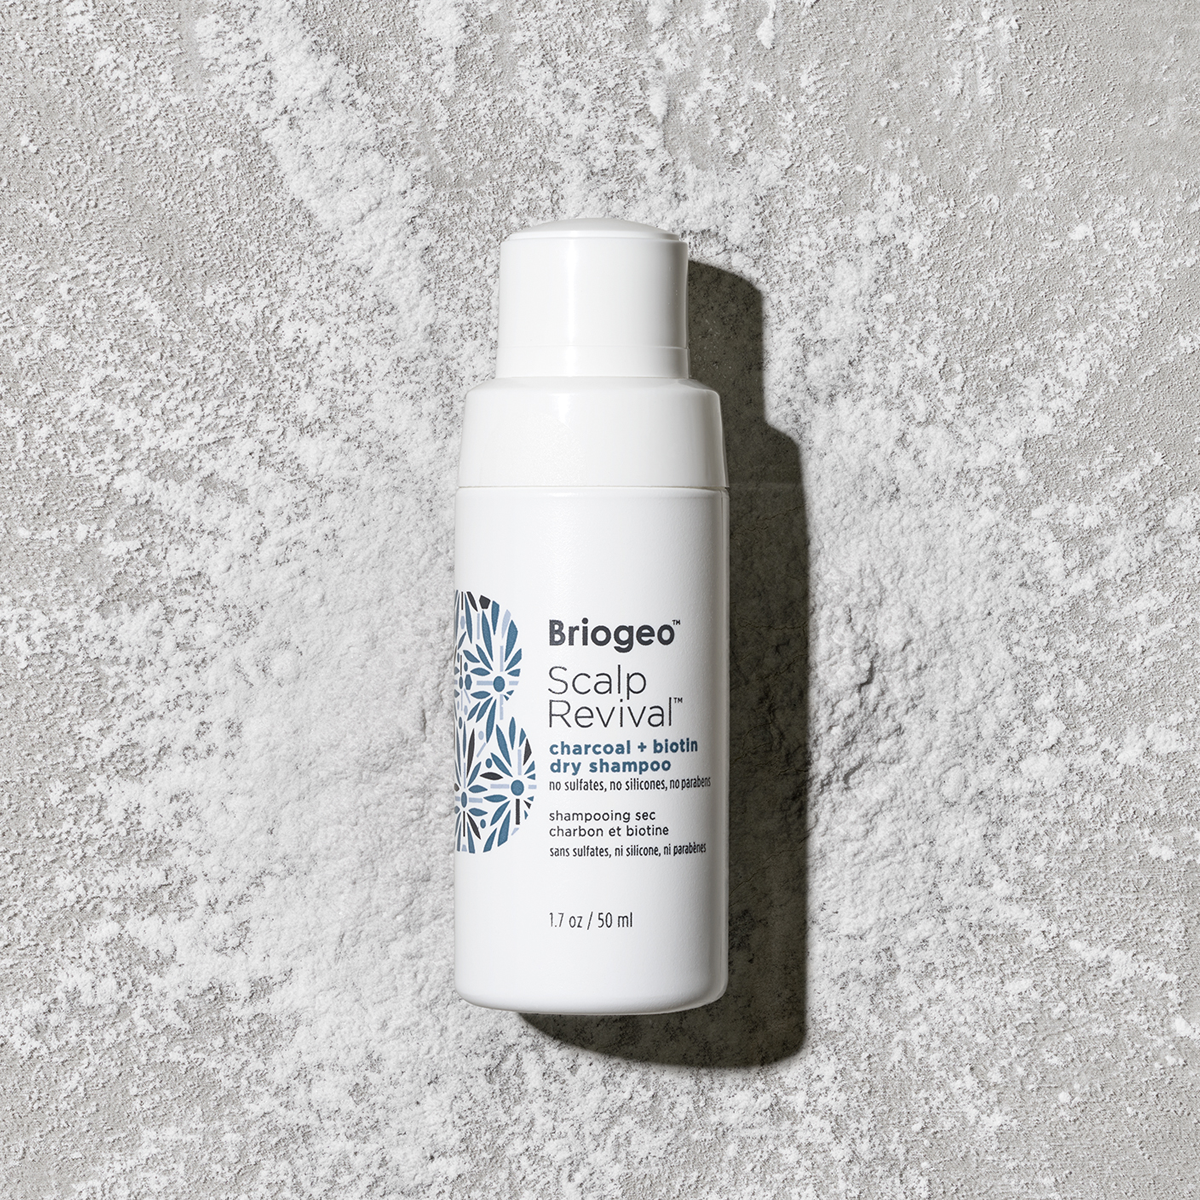 The Best Naturally Derived Dry Shampoo How To Use Briogeo Hair Care